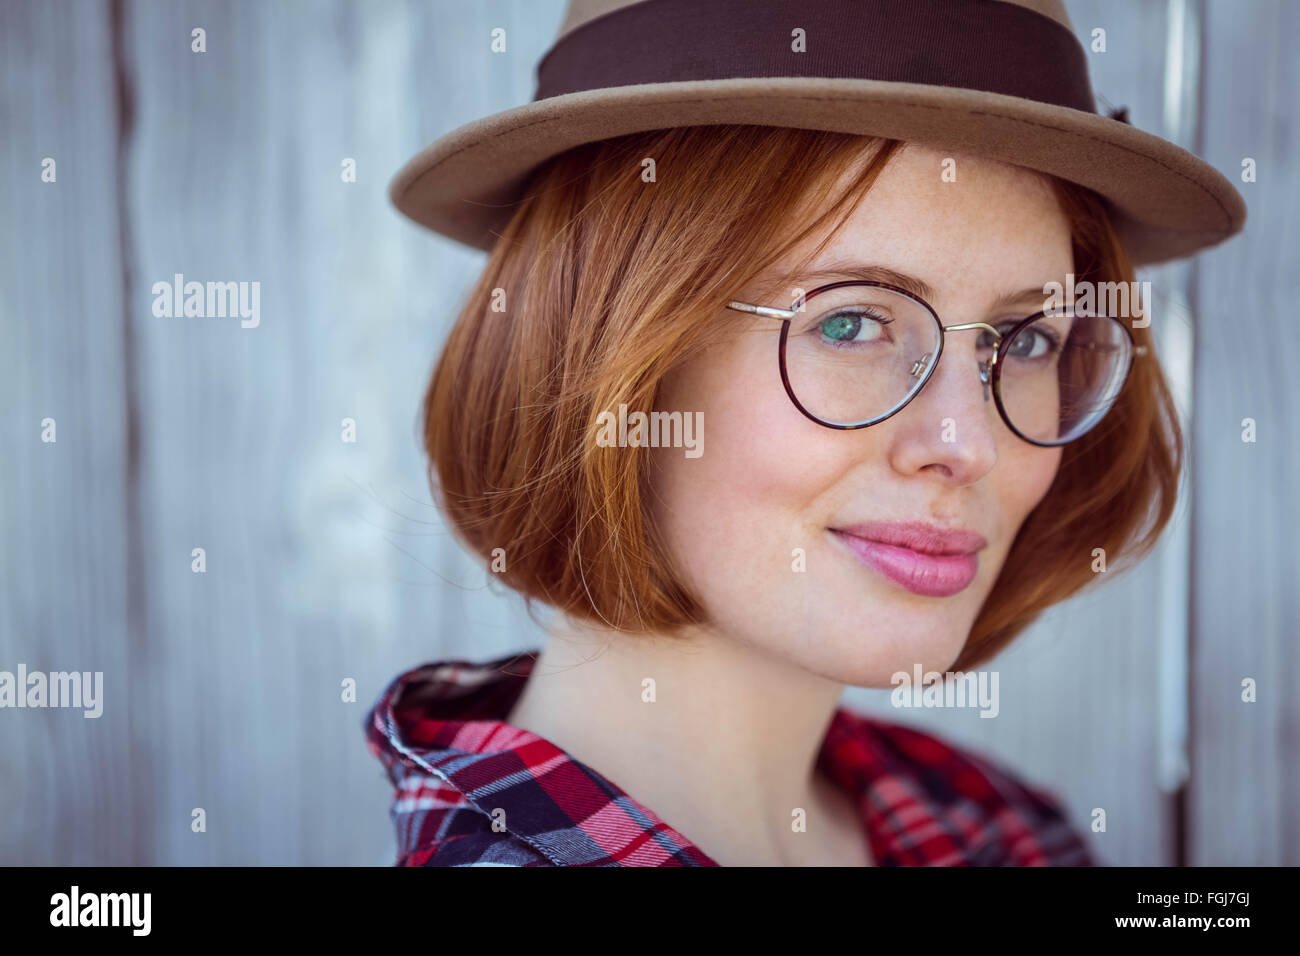 up close portrait of a smiling hipster woman Stock Photo